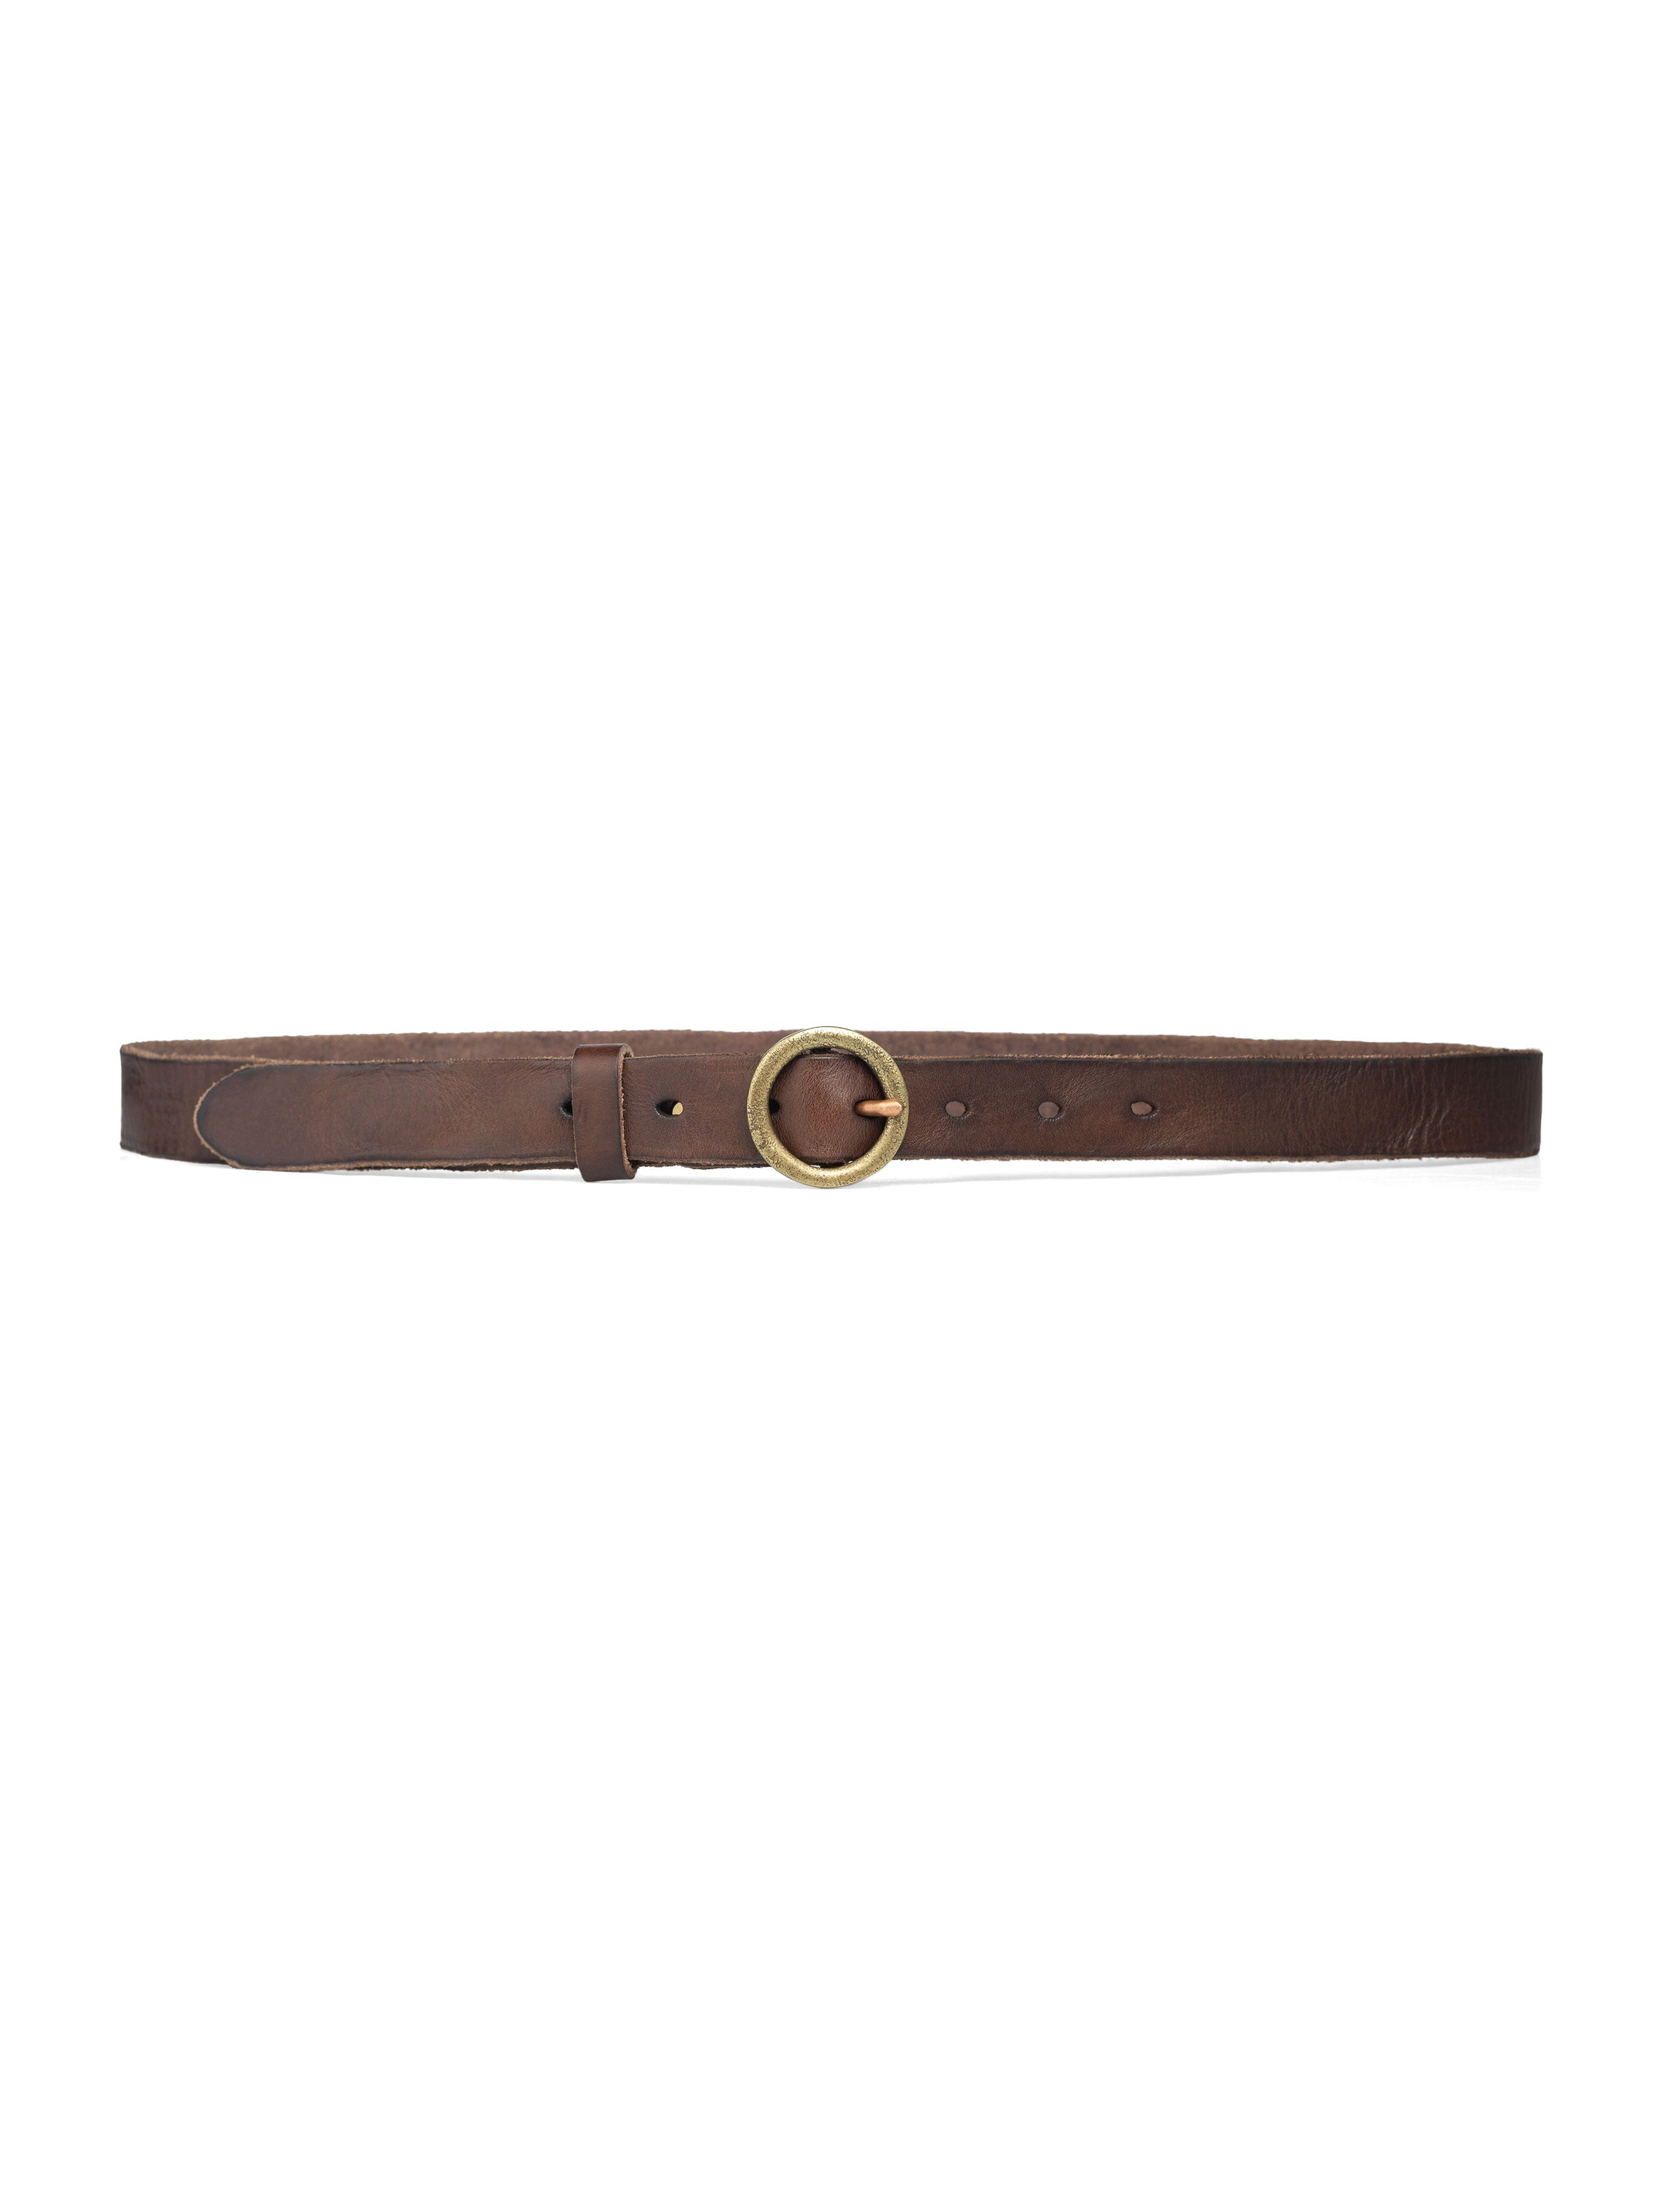 Italian Rustic Leather Belt with Round Gold-toned Buckle - Zeve Shoes